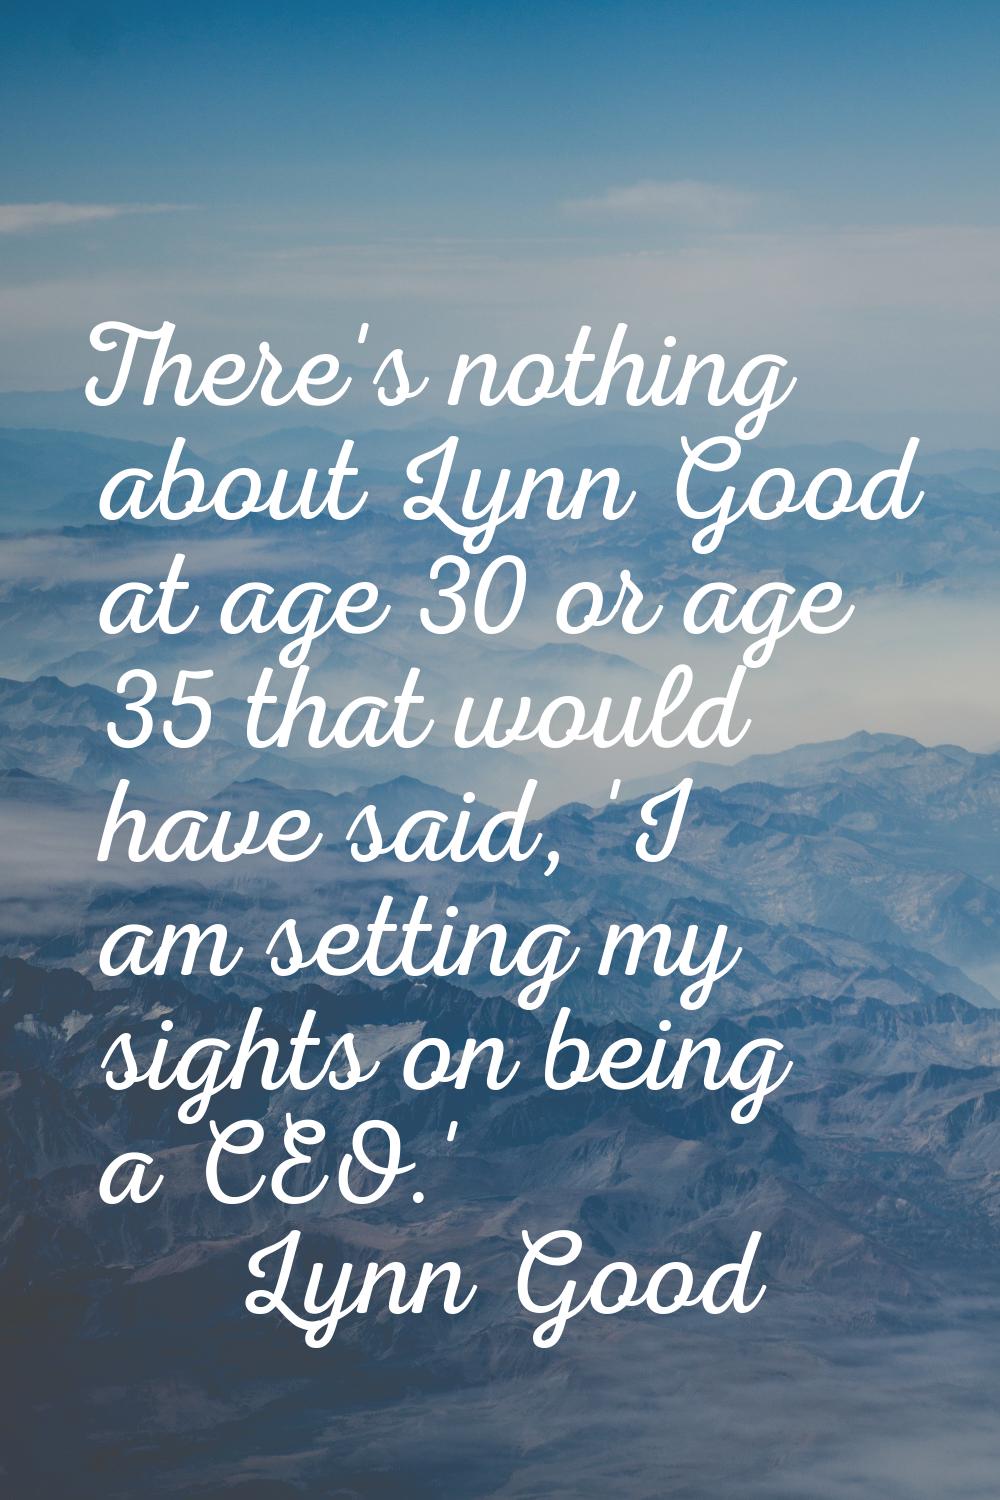 There's nothing about Lynn Good at age 30 or age 35 that would have said, 'I am setting my sights o